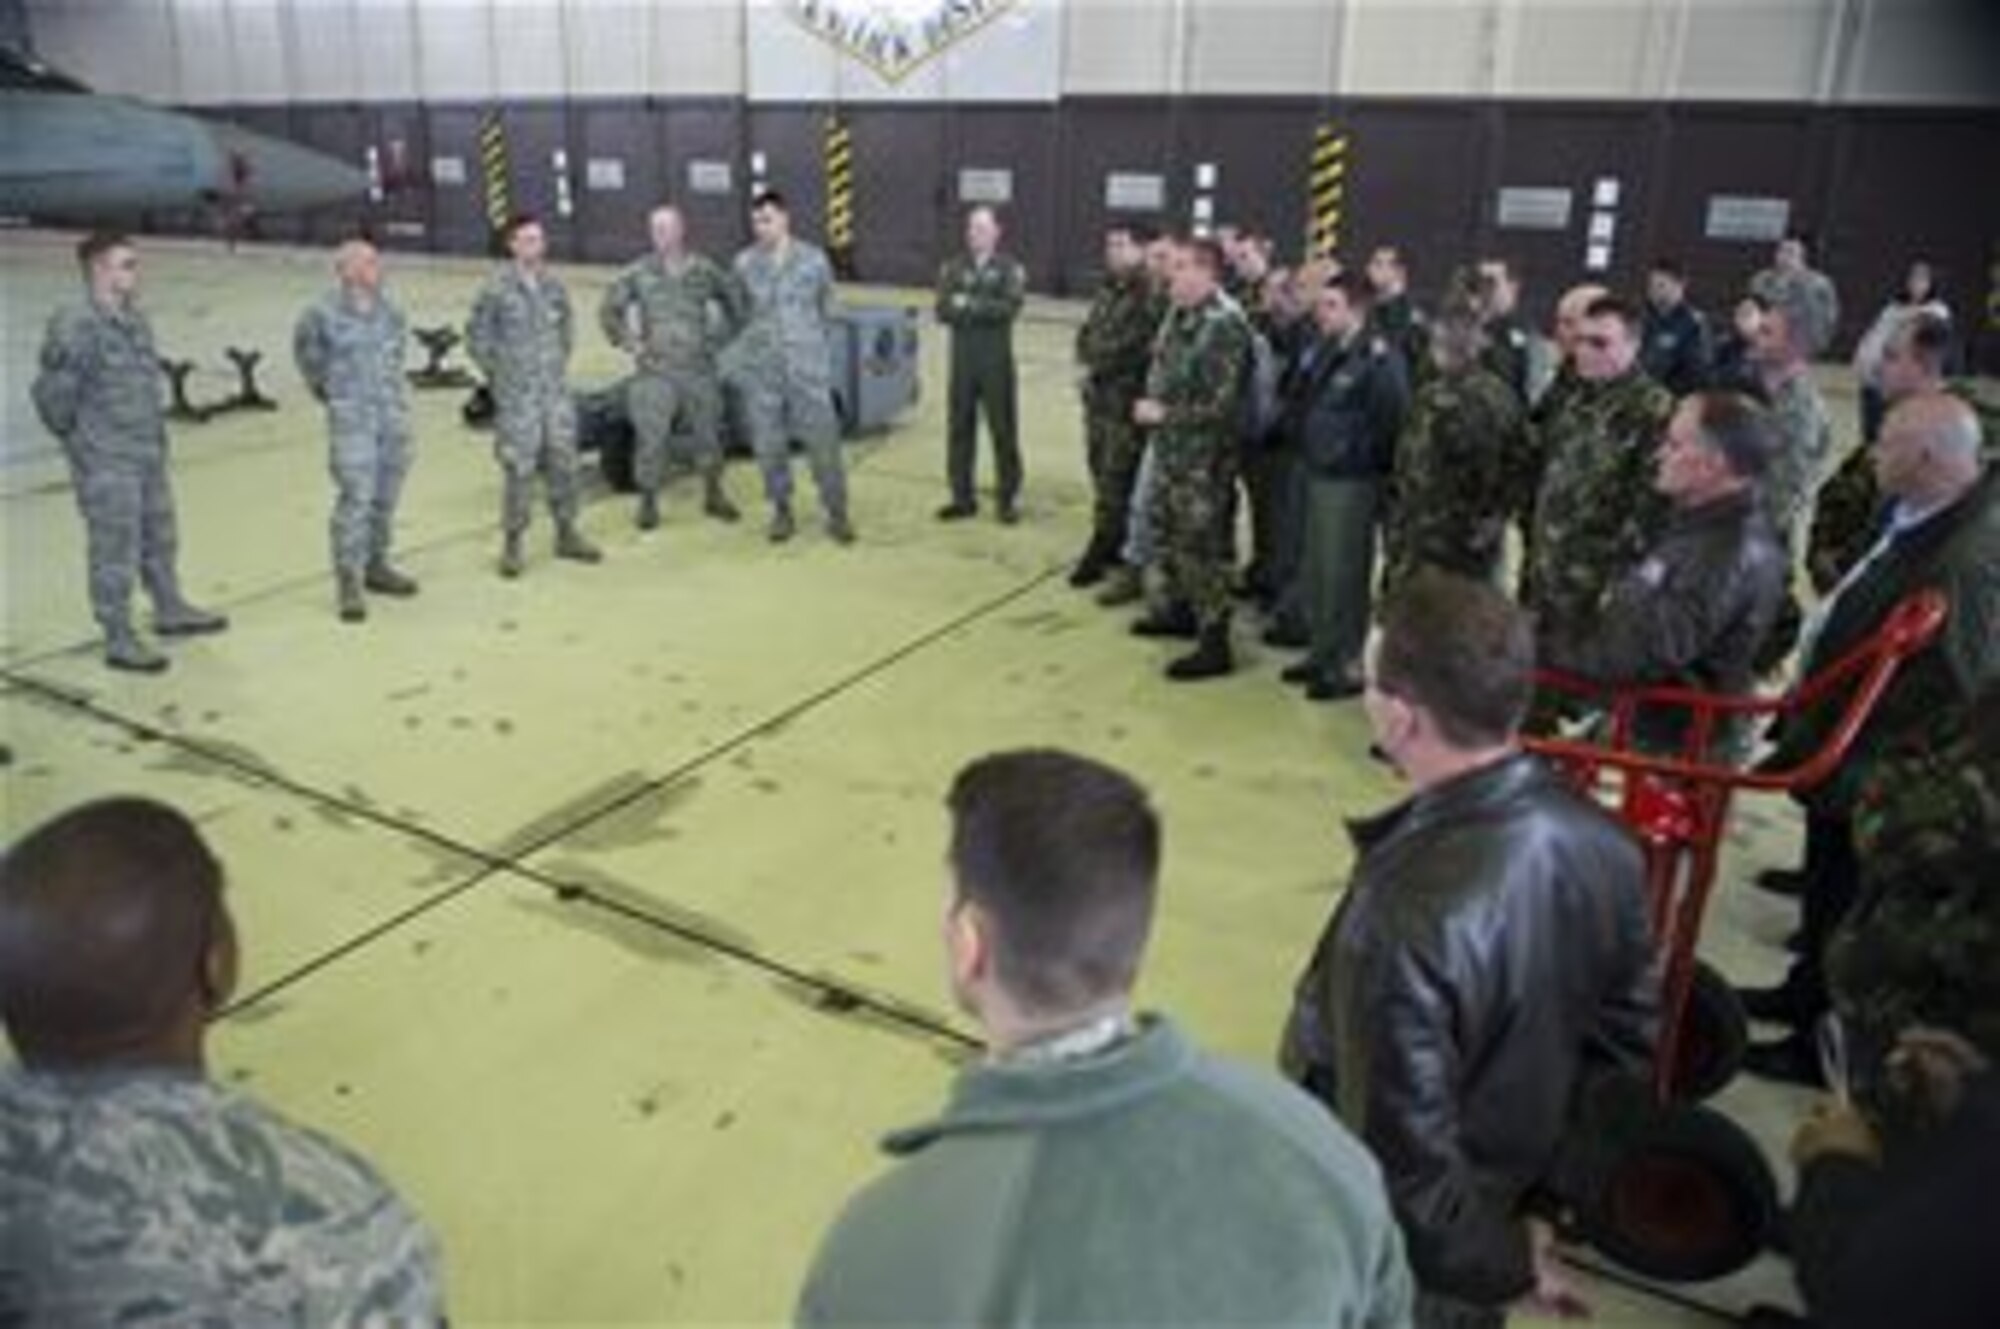 U.S. and Romanian air force members discuss F-16 Fighting Falcon fighter aircraft weapons capabilities at Spangdahlem Air Base, Germany, March 25, 2014. Romanian air force officials toured the 52nd Fighter Wing in order to familiarize themselves with the operations, maintenance and support of a fully operational F-16 squadron. (U.S. Air Force photo by Staff Sgt. Chad Warren/Released)